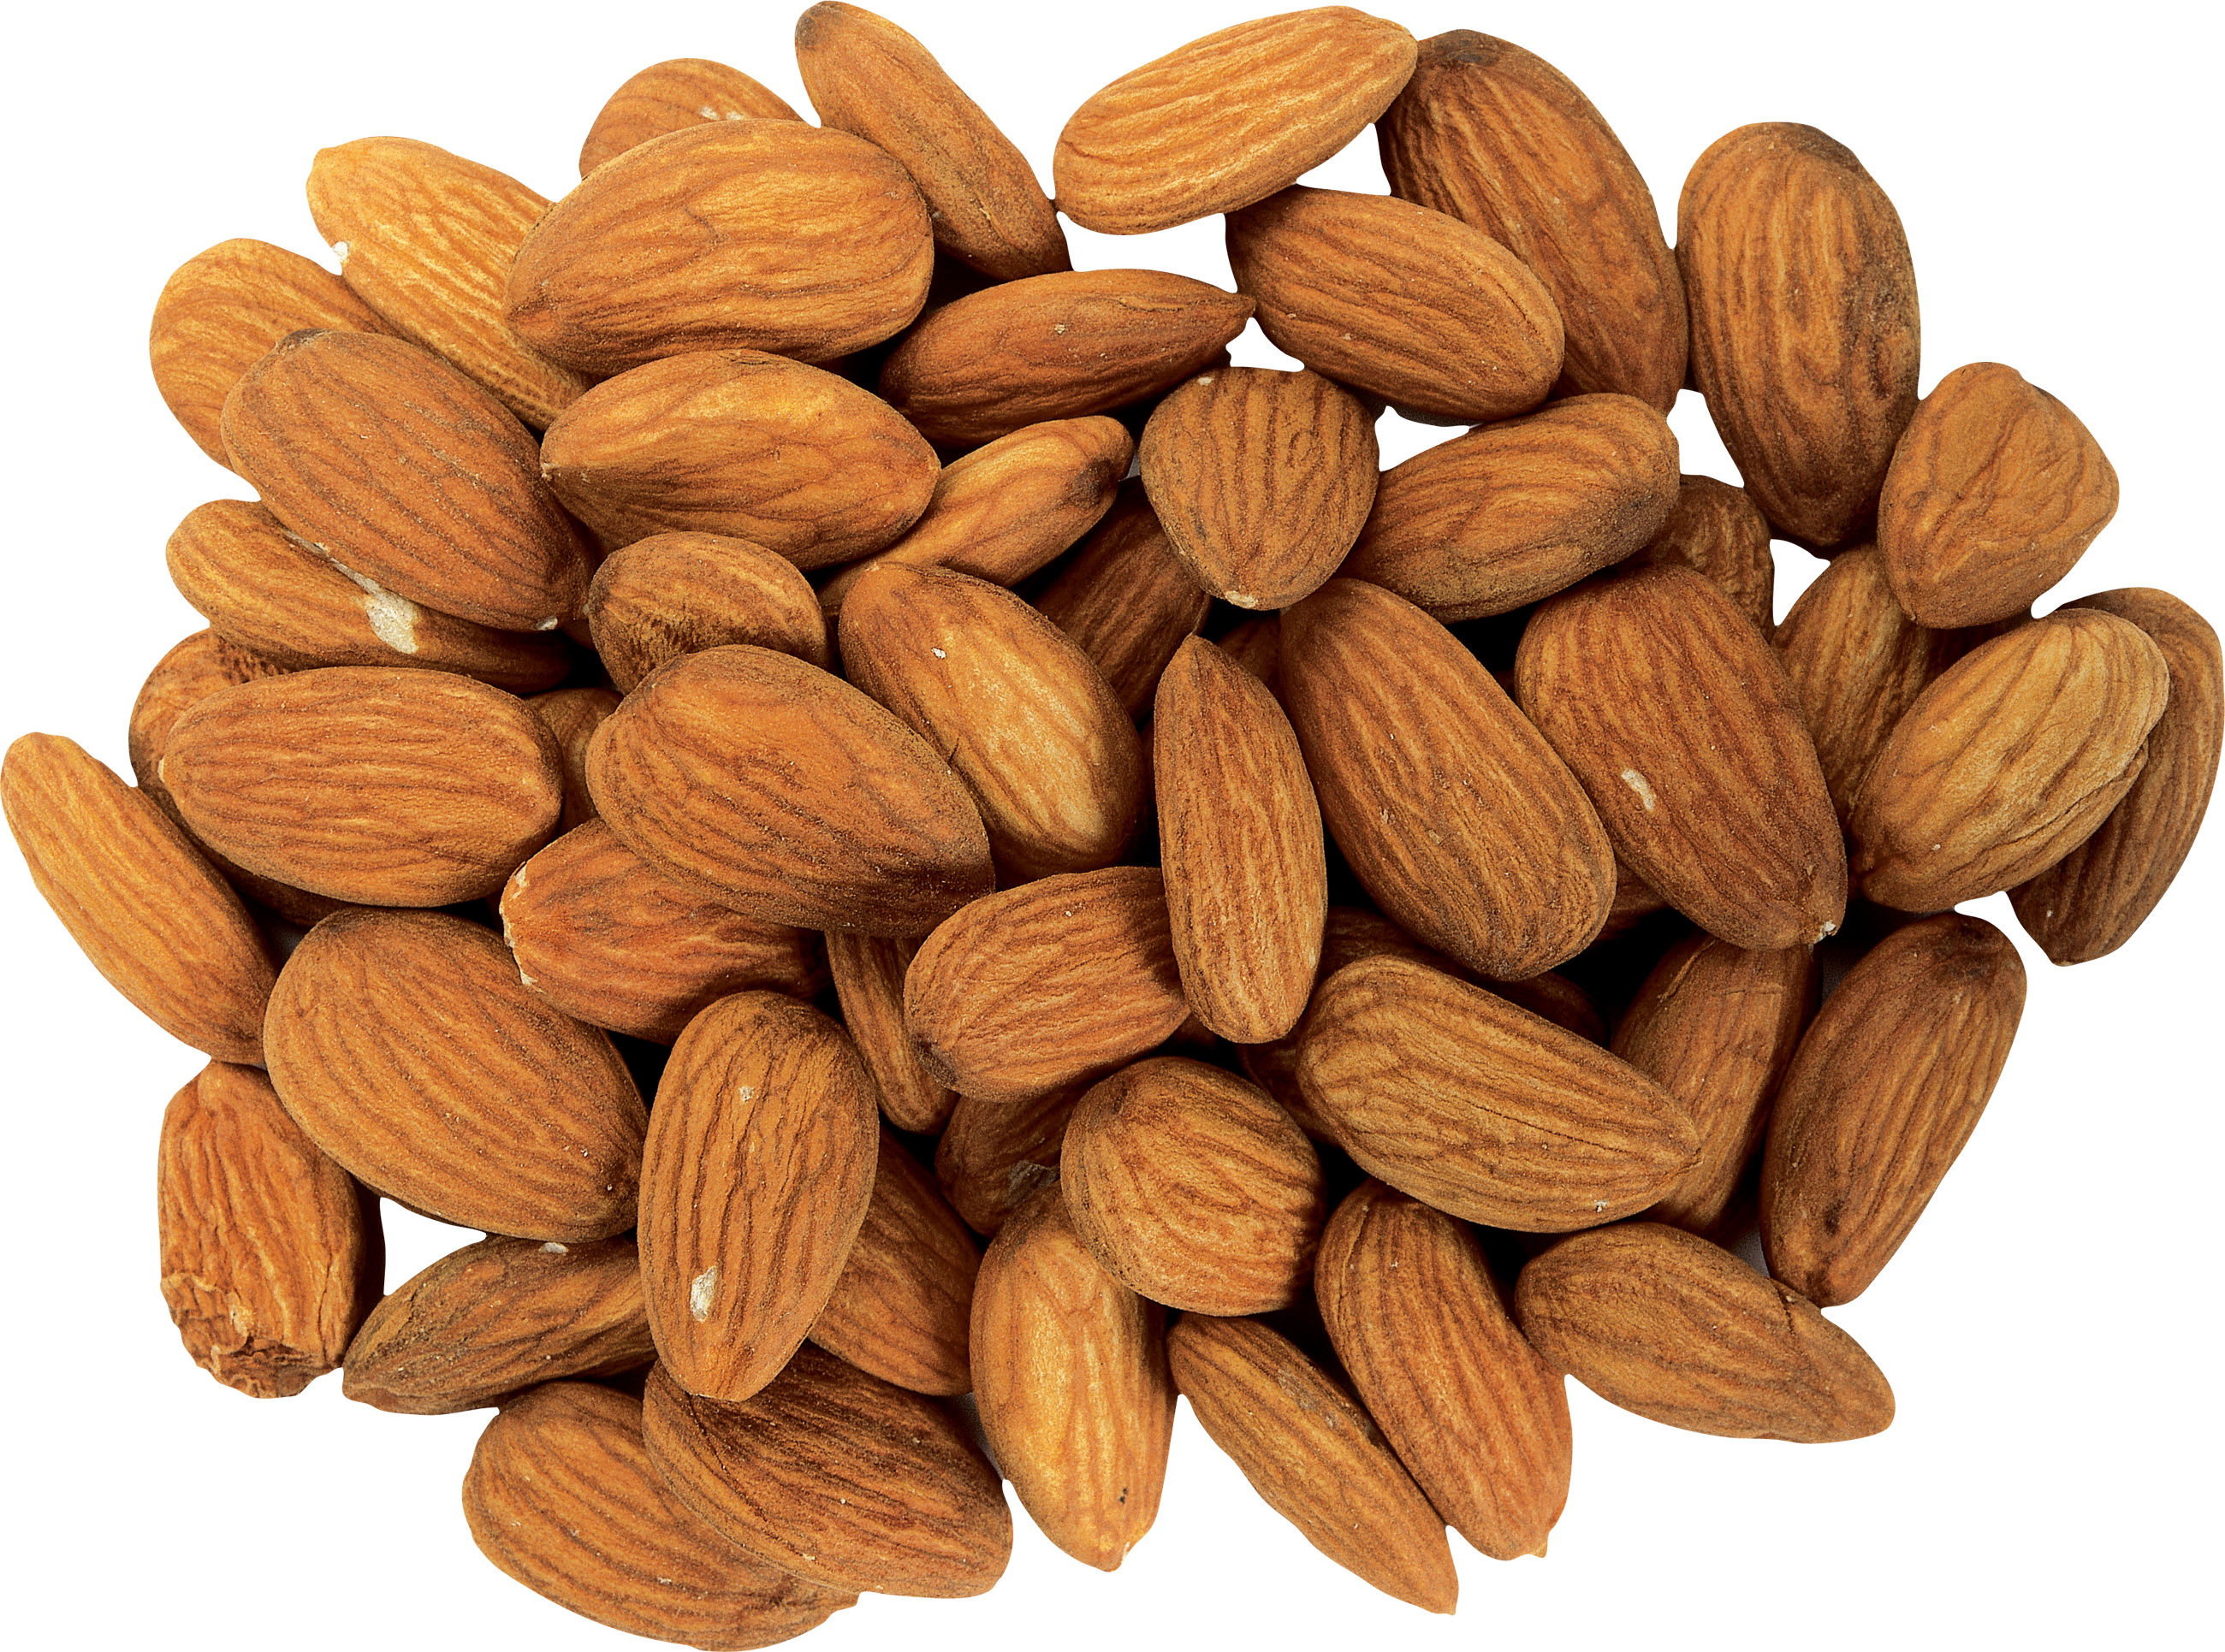 Almonds Wallpapers 24 images inside